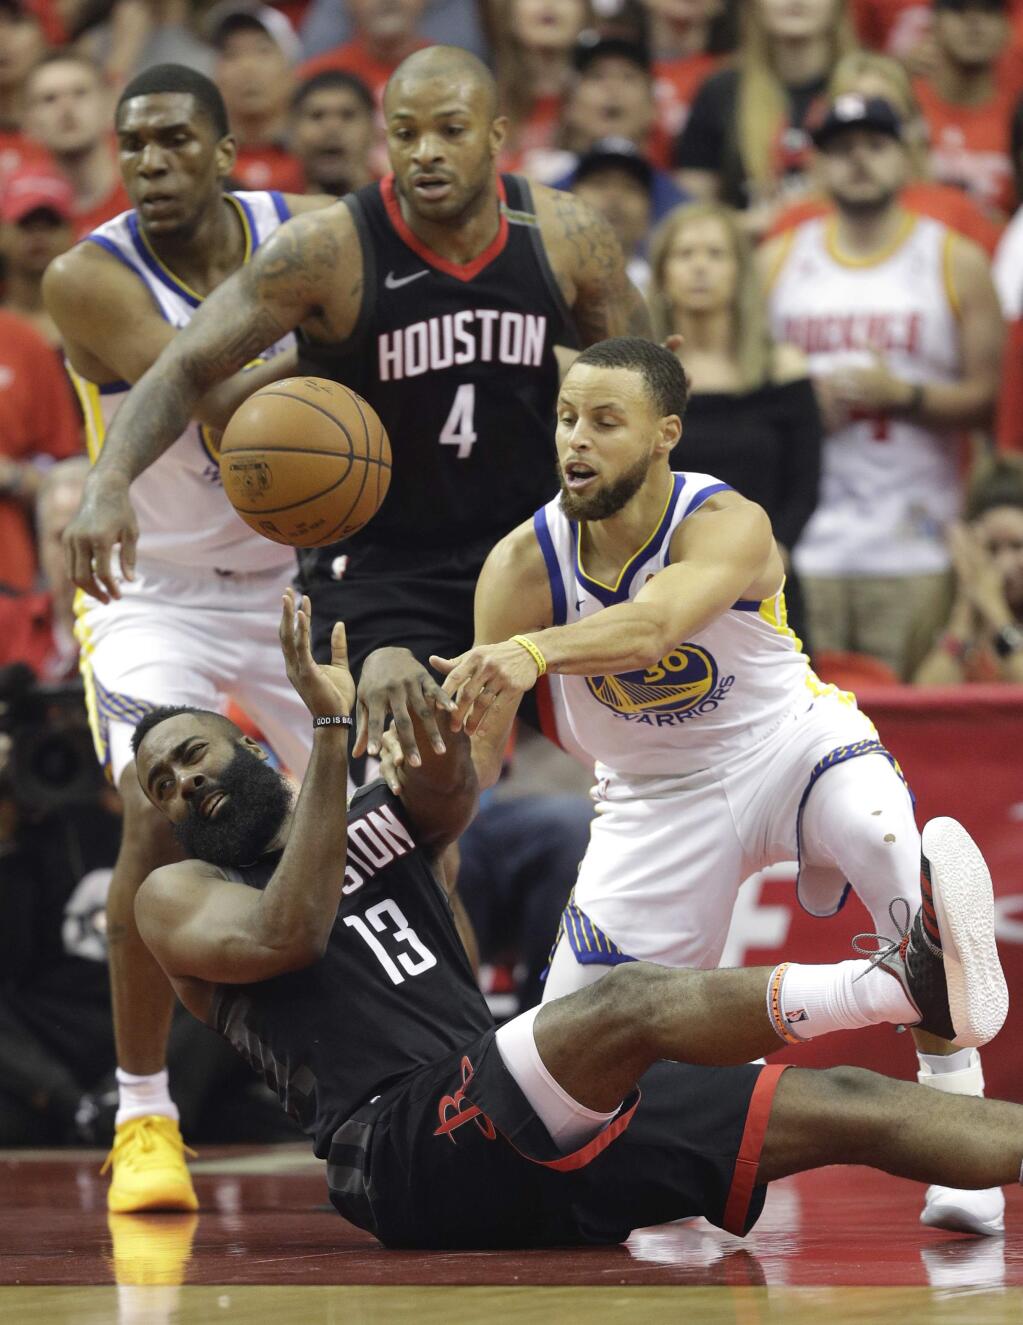 Houston Rockets guard James Harden (13) and Golden State Warriors guard Stephen Curry (30) scramble for a loose ball during the first half in Game 7 of the NBA basketball Western Conference finals, Monday, May 28, 2018, in Houston. (AP Photo/David Phillip)